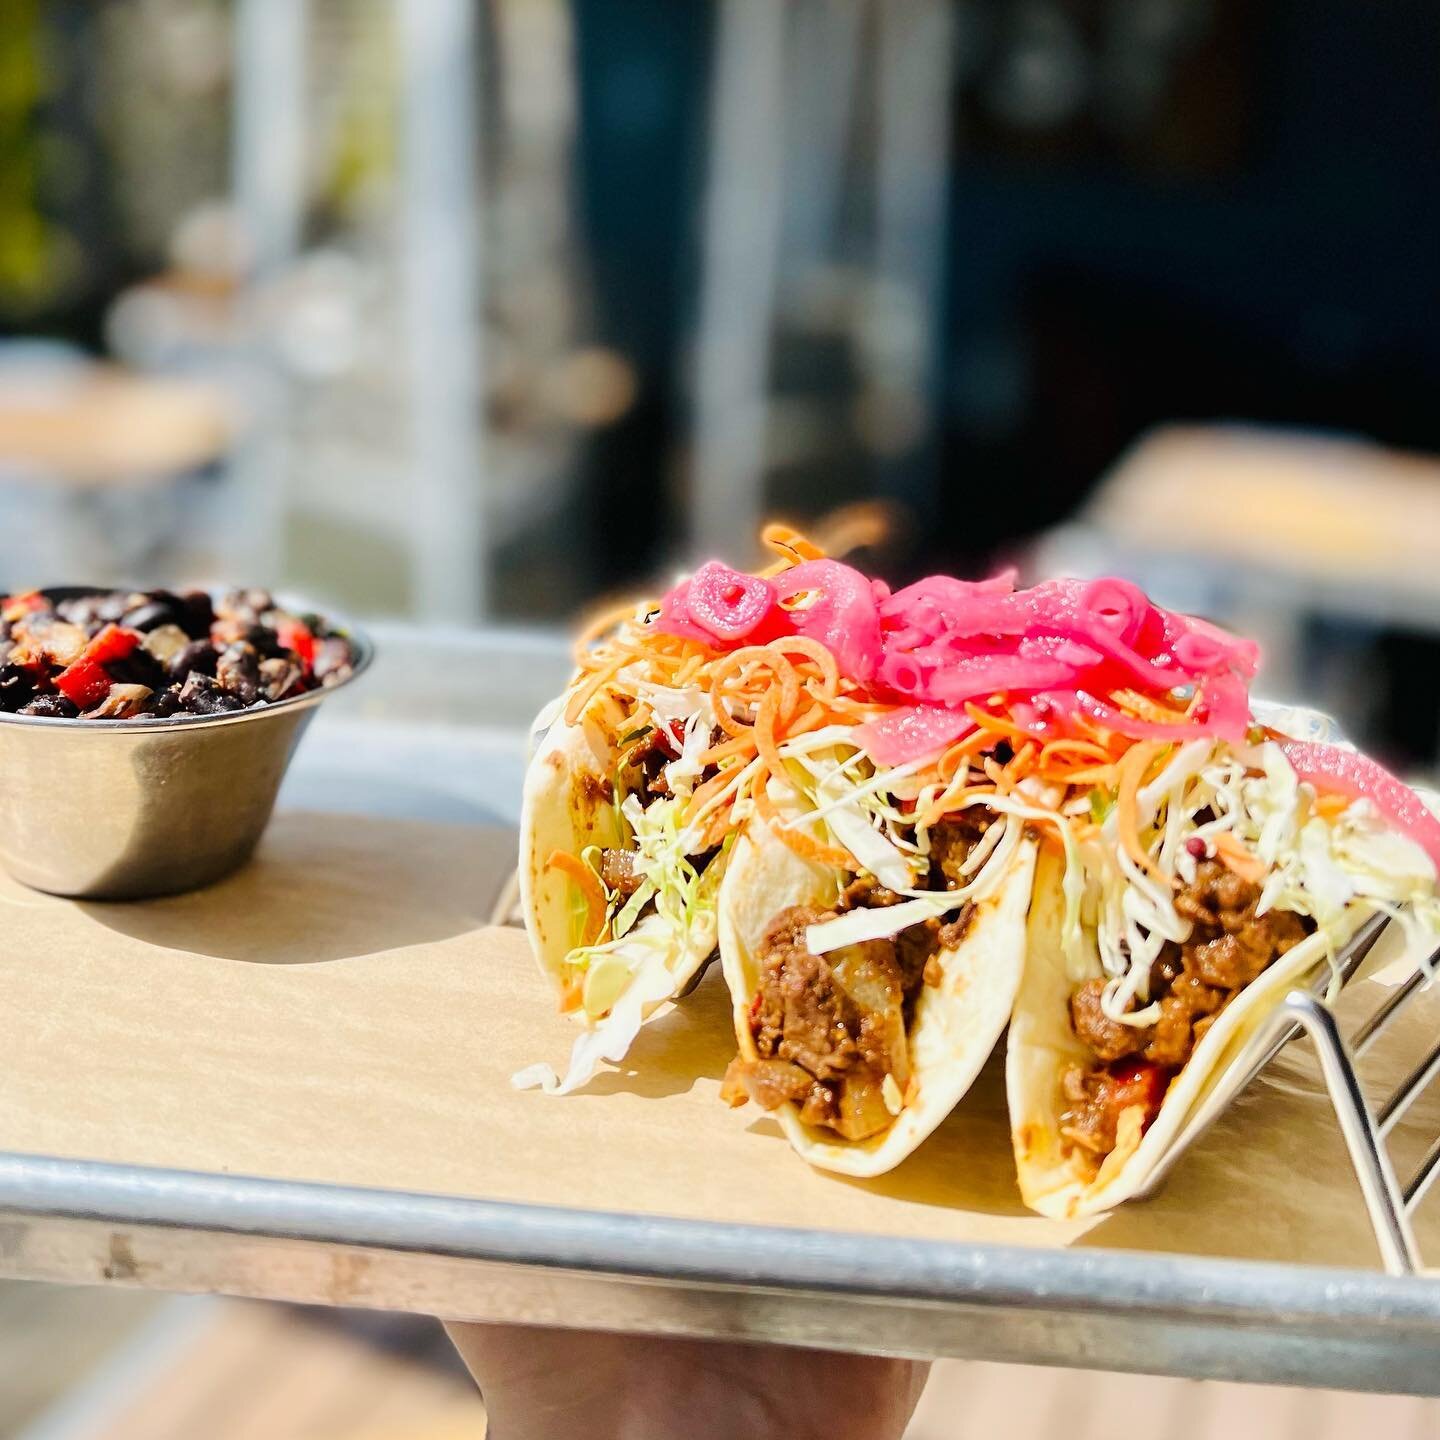 This is for the 🔥🌶️spice🌶️🔥 lovers - todays Taco Tuesday Special is HOT 🥵 

🌶️ Chile Marinated Filet | Cabbage | Carrots | Peppers | Onions | Jalape&ntilde;os | Pickled Red Onion 

#spicytacos #welovefood #tacotuesday #hothot